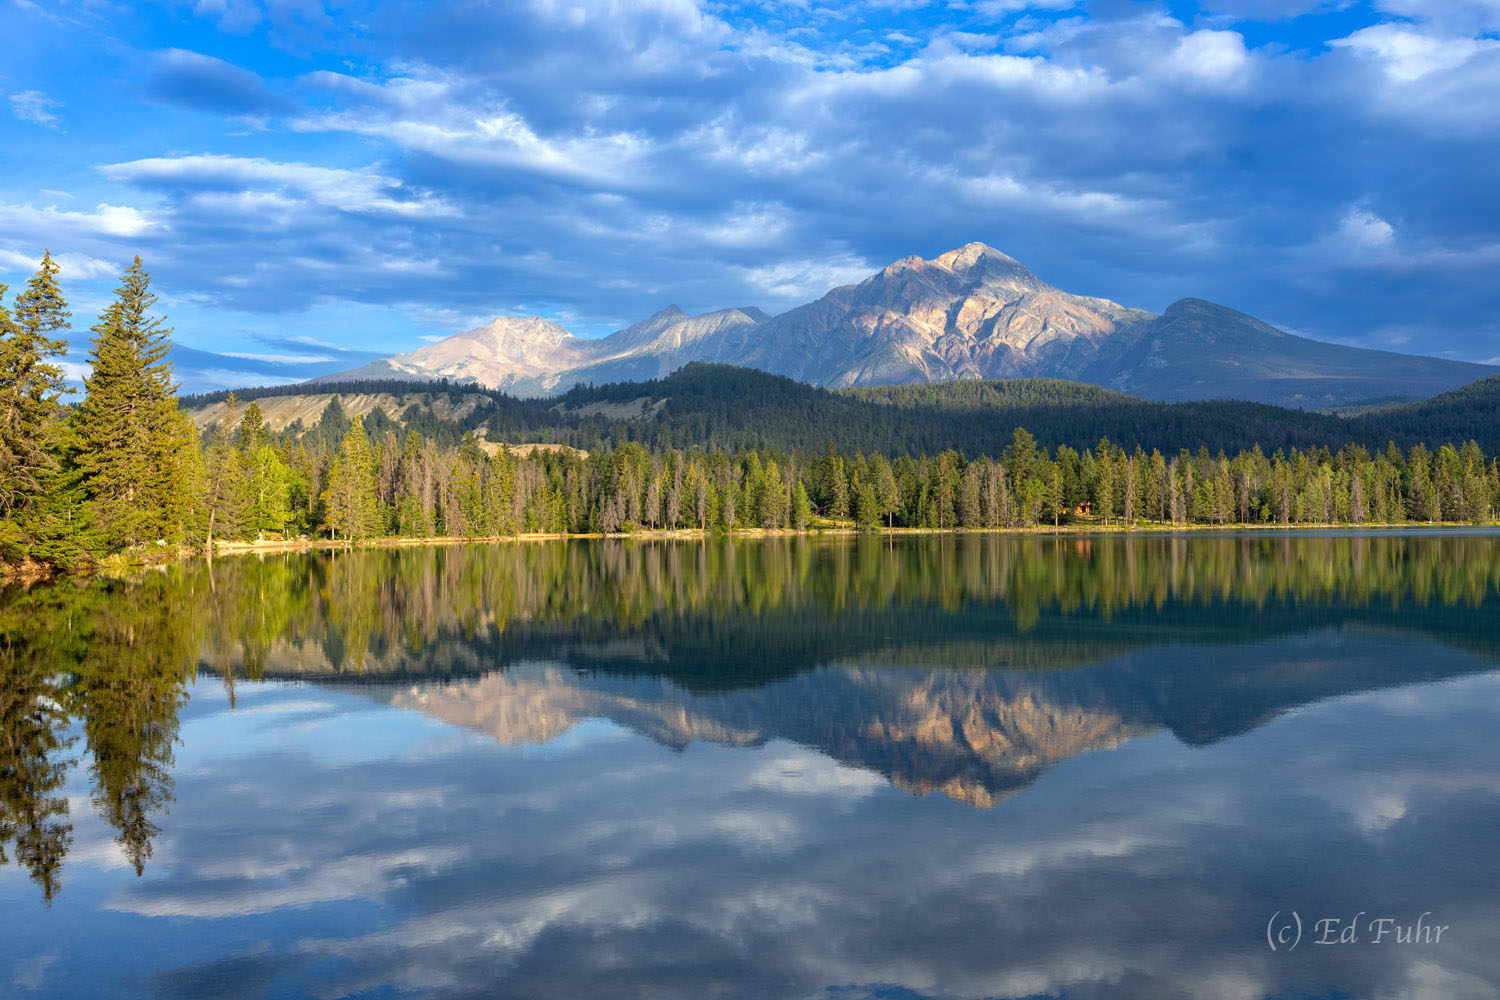 Pyramid Mountain reflects in the still sunrise waters of Edith Lake in Jasper National Park.